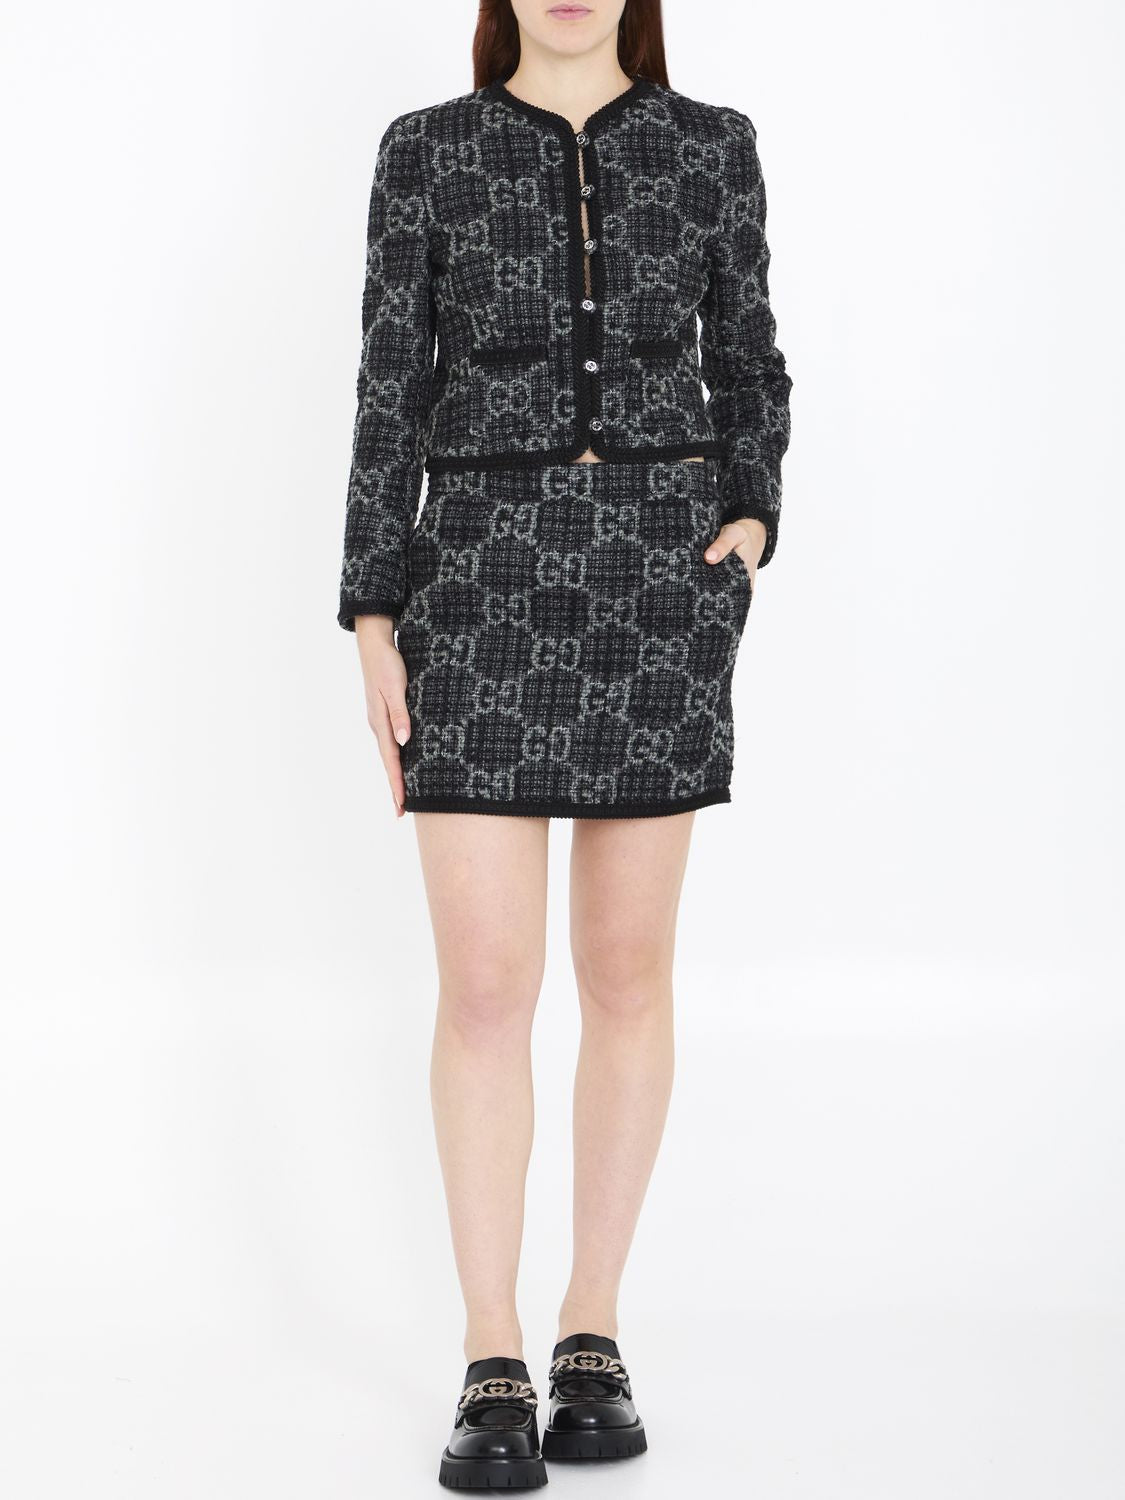 GUCCI Dark Grey and Grey Tweed Skirt - Braided Ribbon Trims, Side Zip and G Button Closure